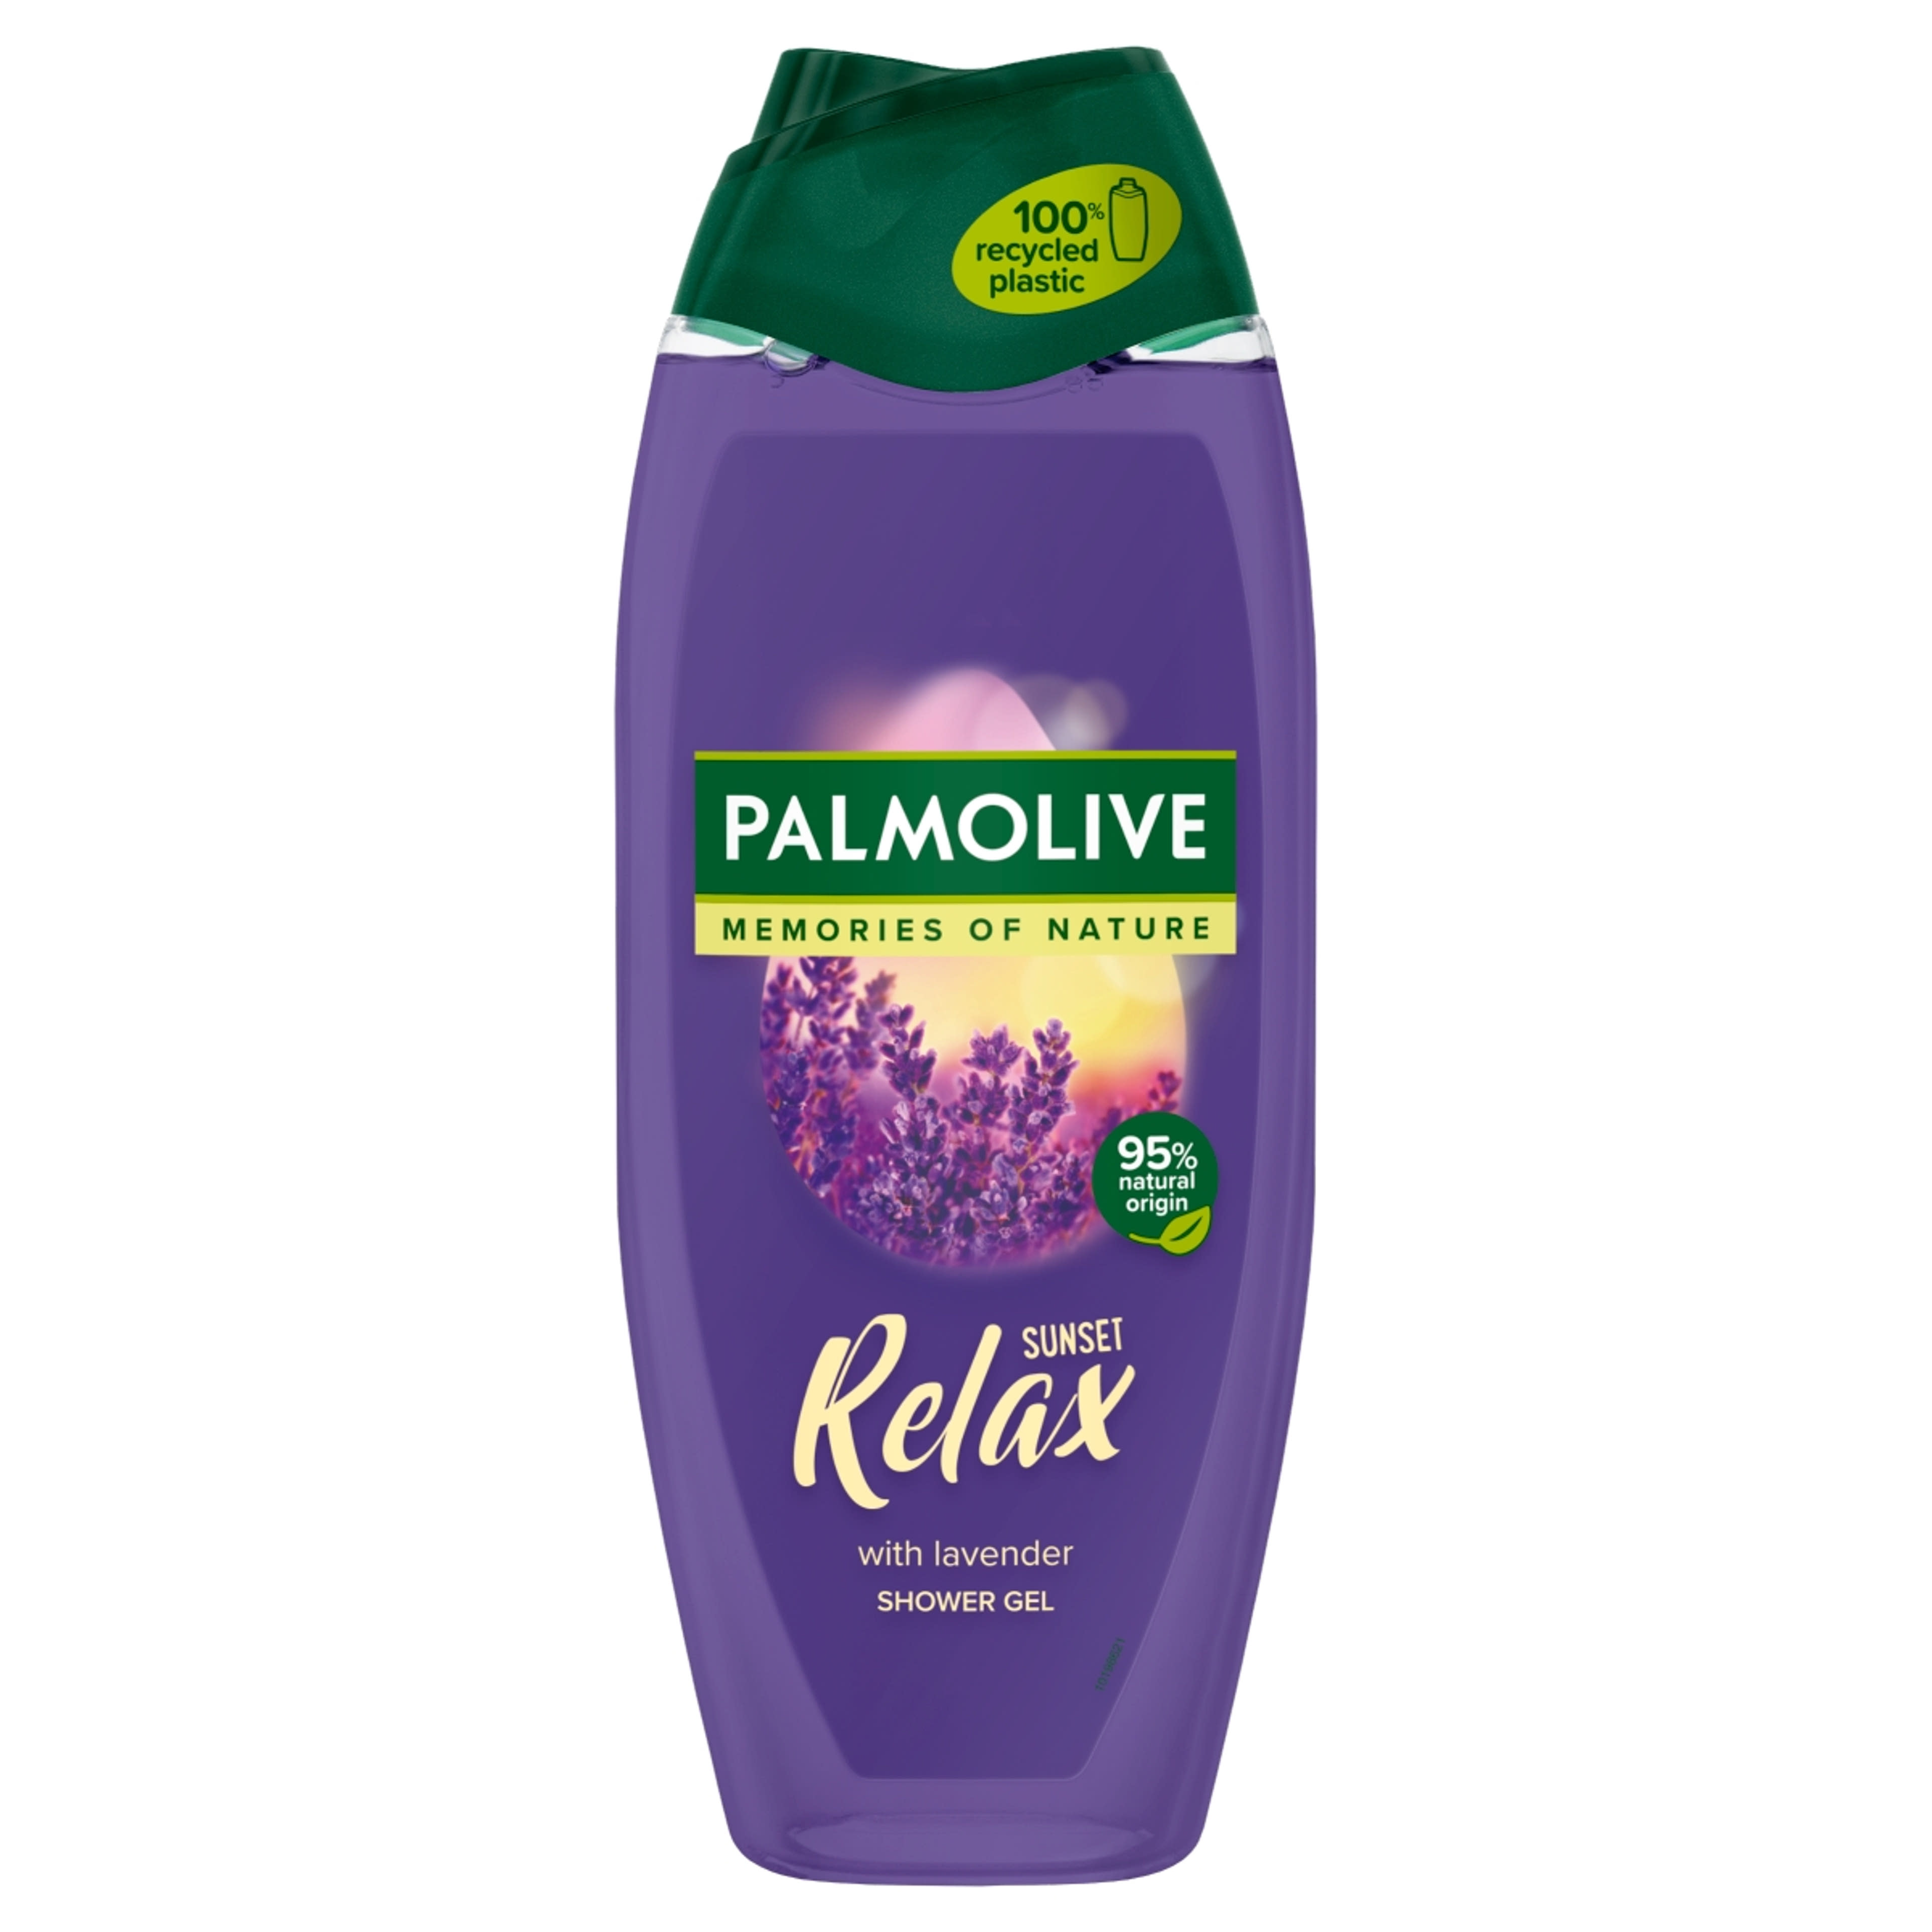 Palmolive Memories of Nature Sunset Relax tusfürdő - 500 ml-1